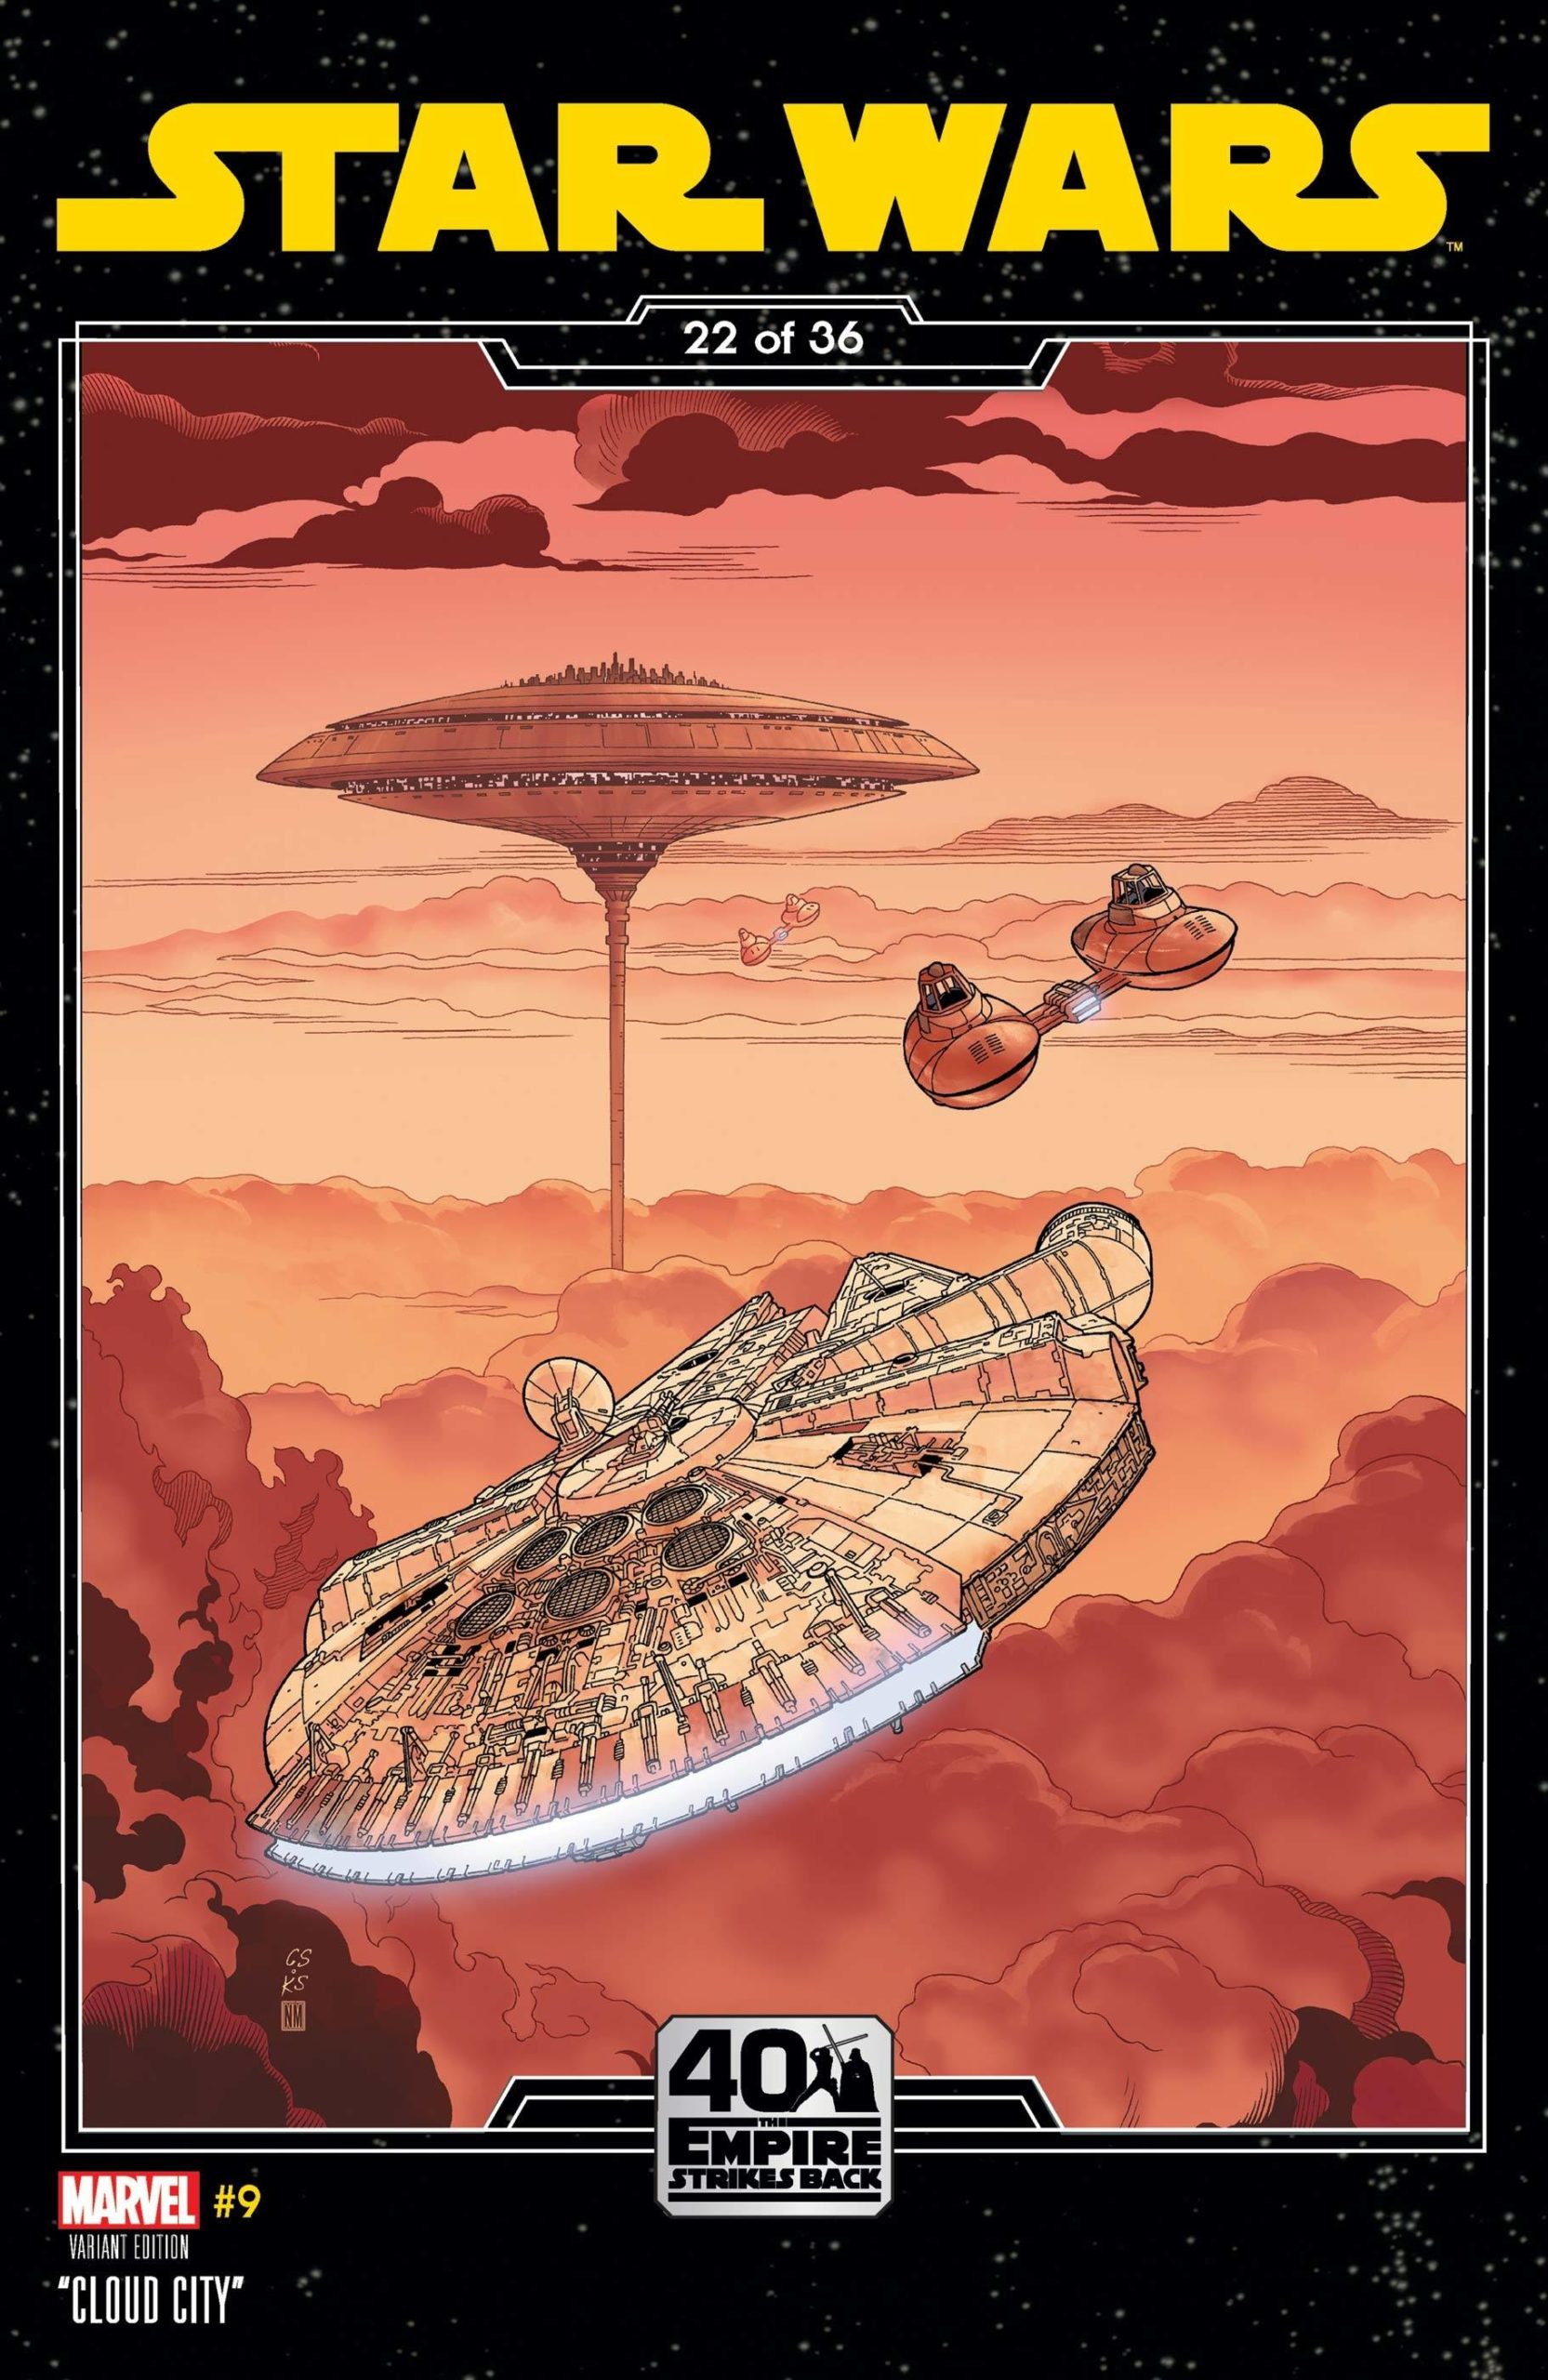 Star Wars #9 (Chris Sprouse The Empire Strikes Back Variant Cover 22 of 36) (09.12.2020)